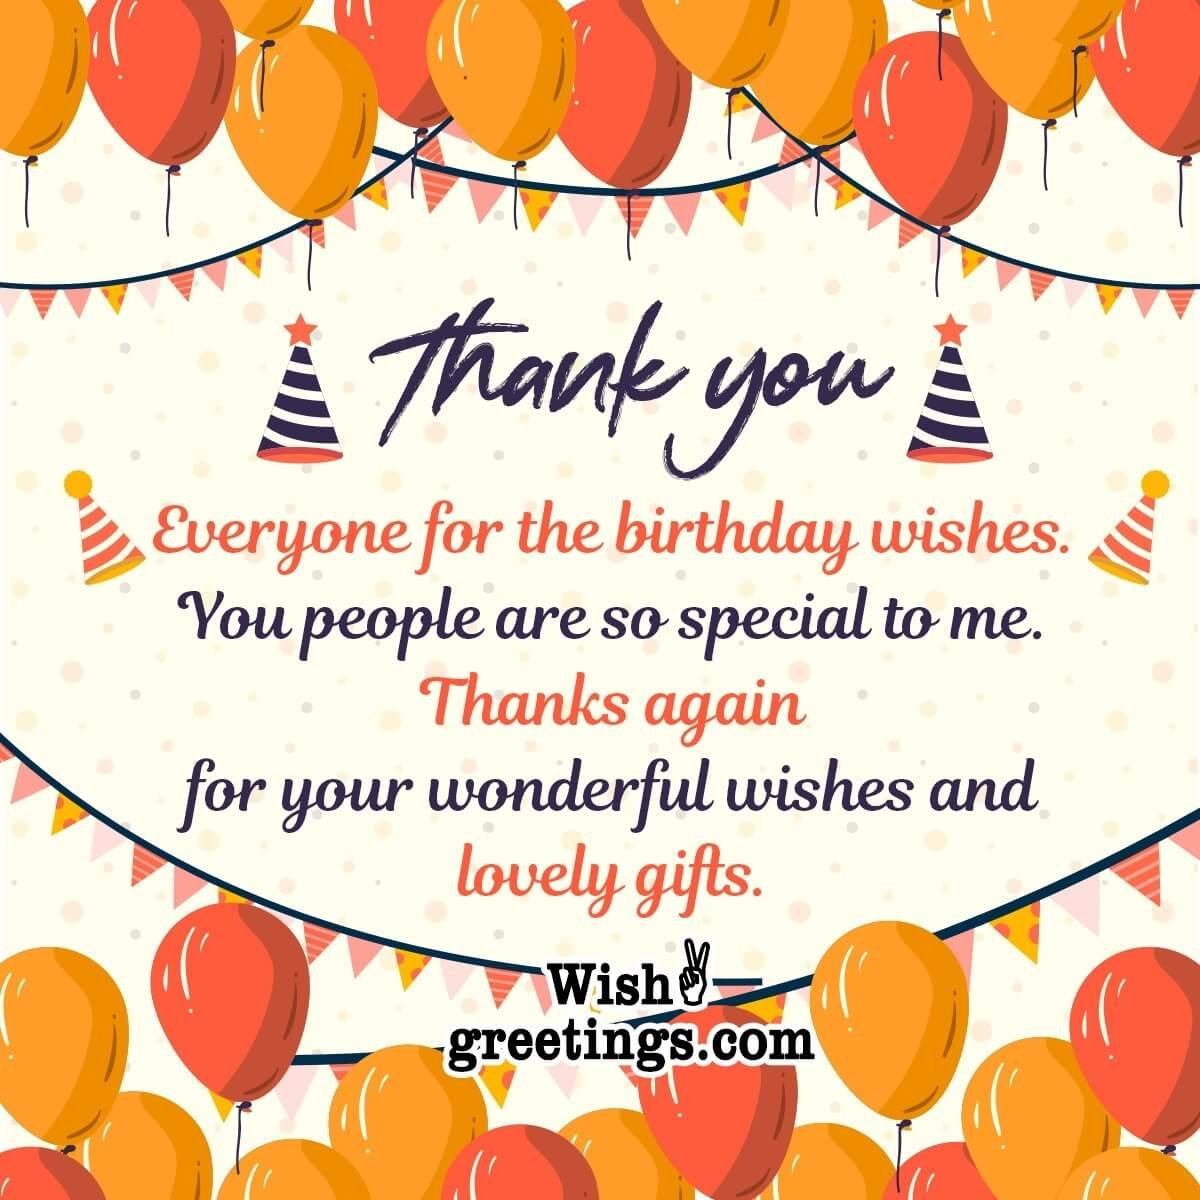 Ultimate Collection of 999+ Spectacular Full 4K Birthday Thank You Images